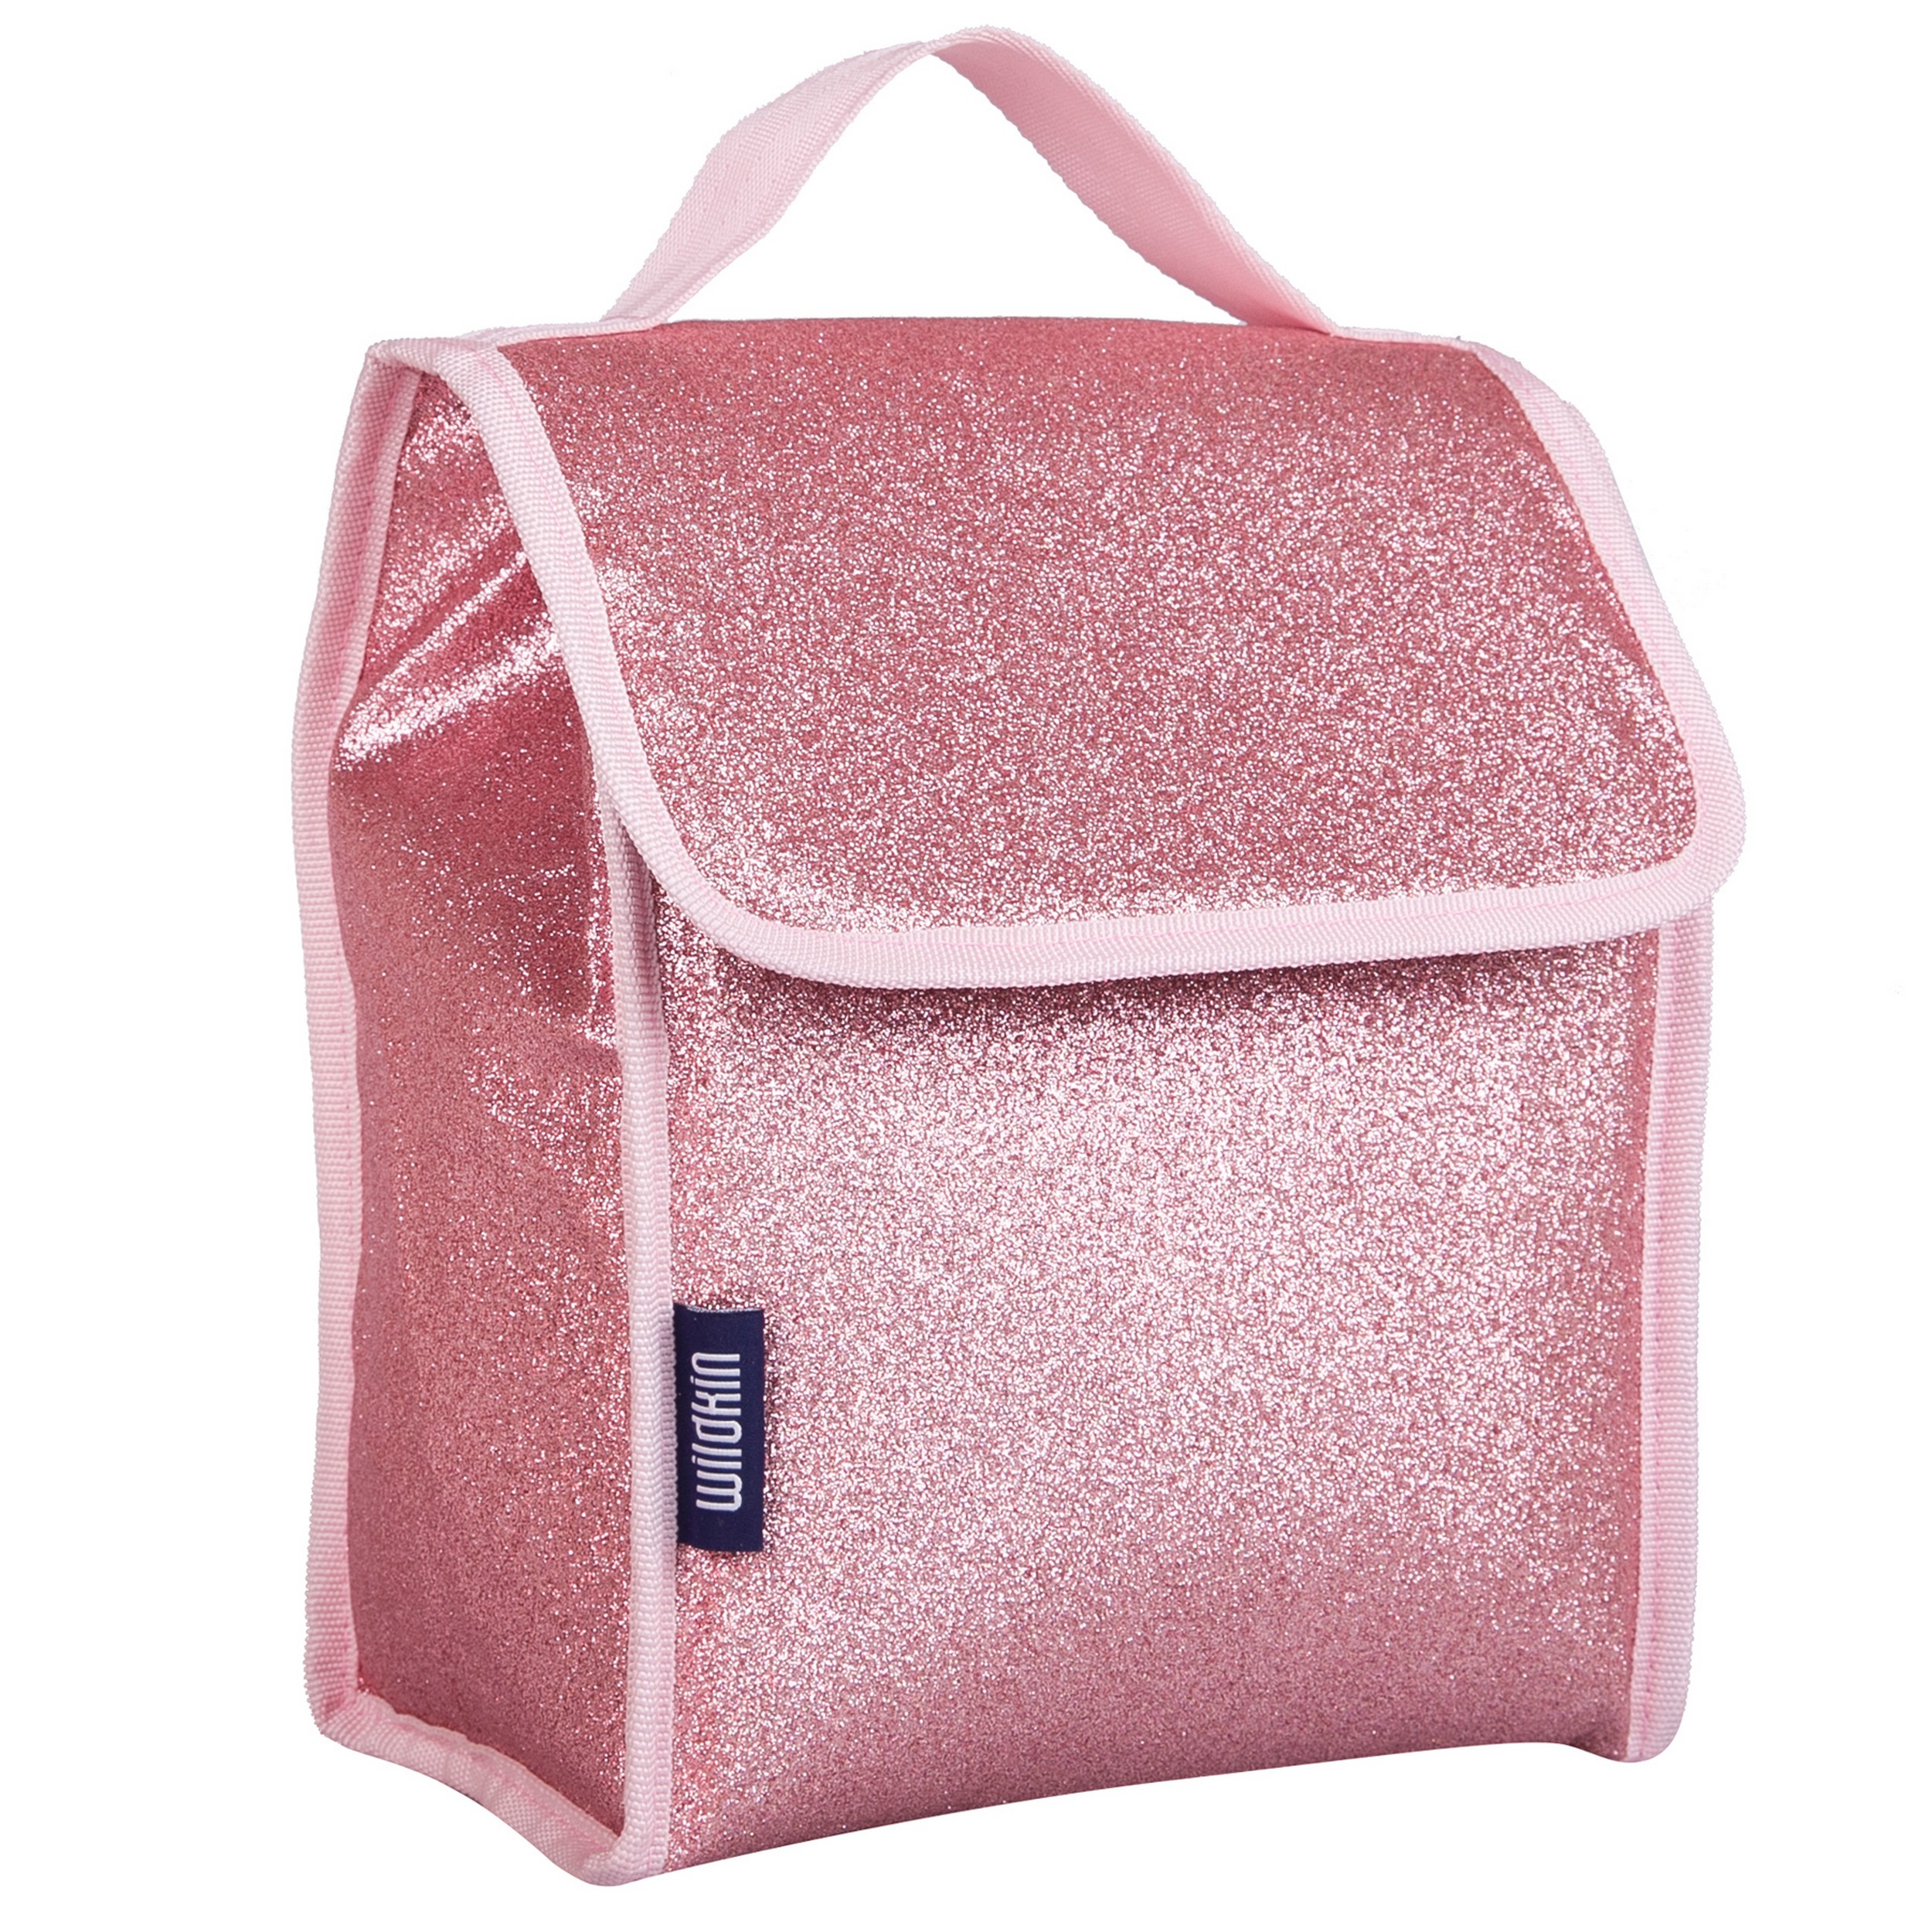 Wildkin Kids Insulated Reusable Lunch Bag (Pink Glitter) - image 1 of 8